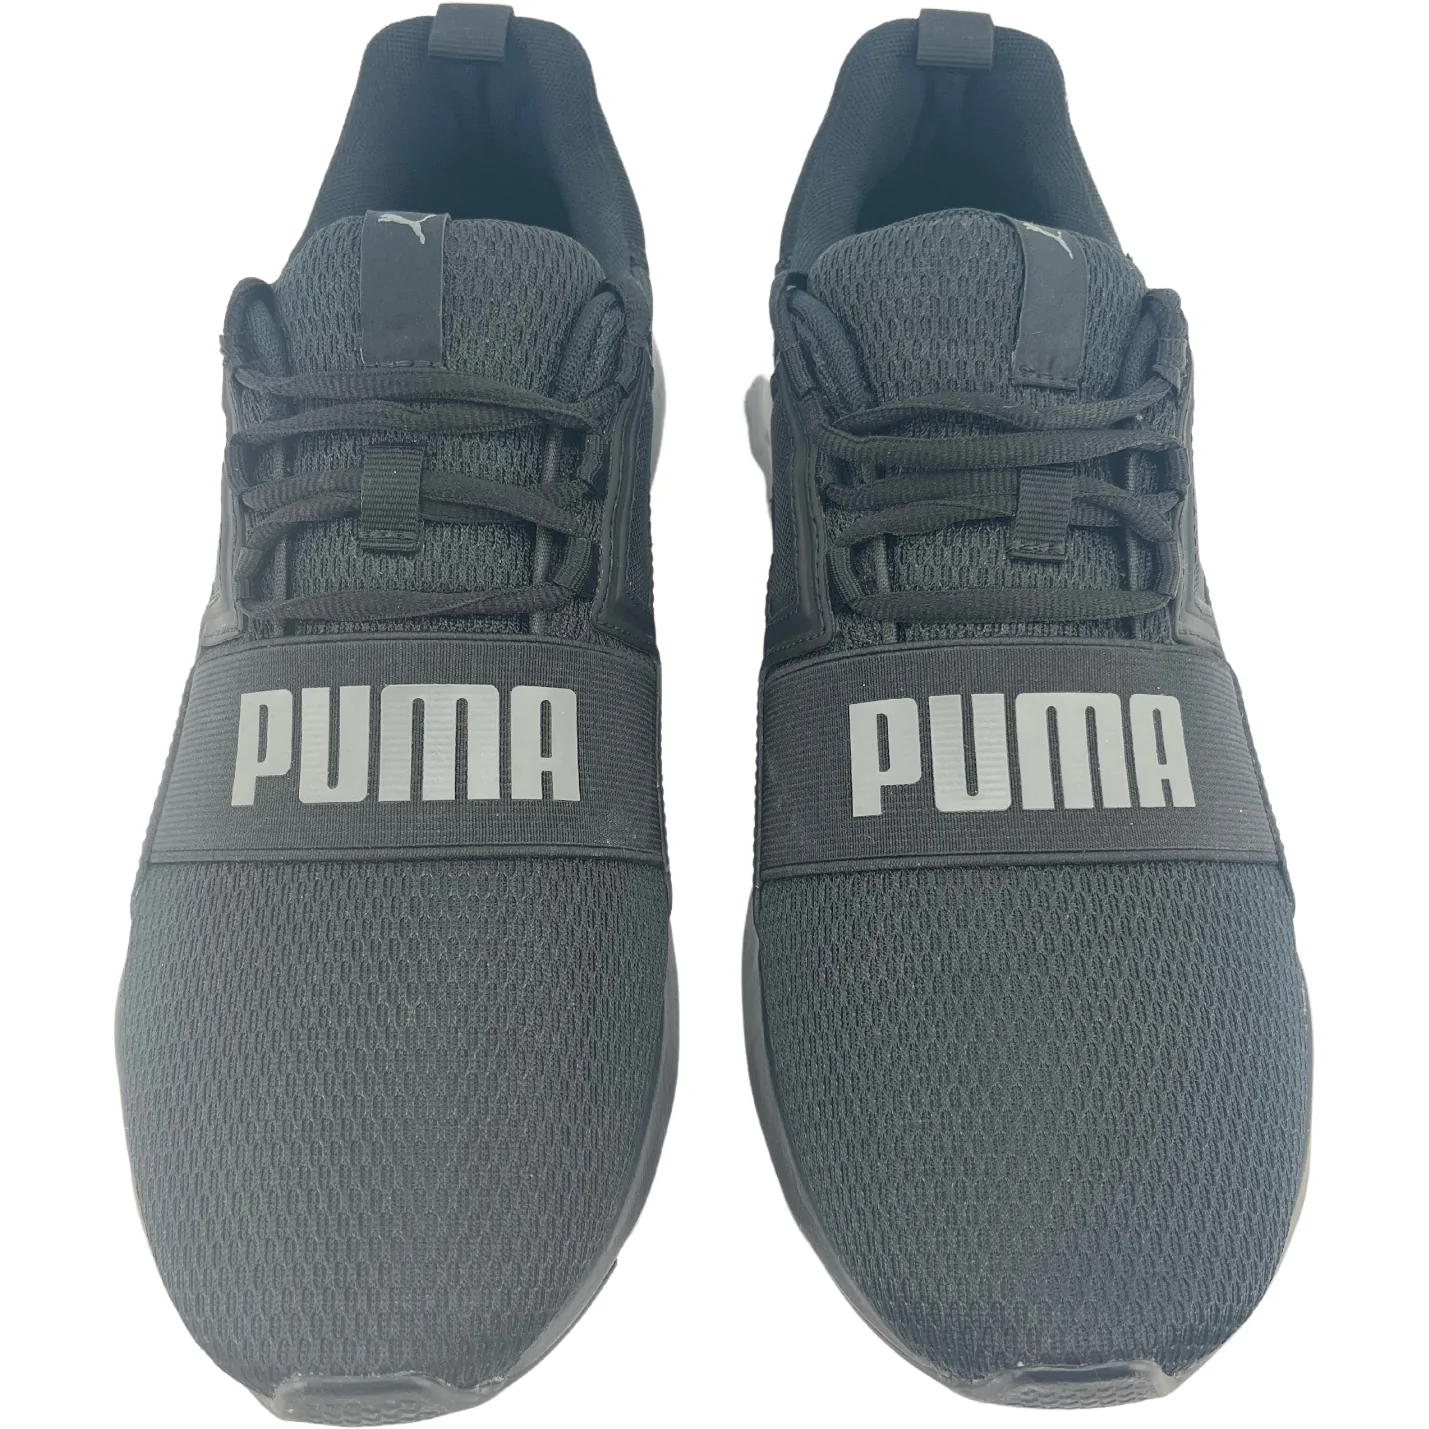 Puma Men's Running Shoes / Puma Wired Cage / Black / Size 10 **NO TAGS**